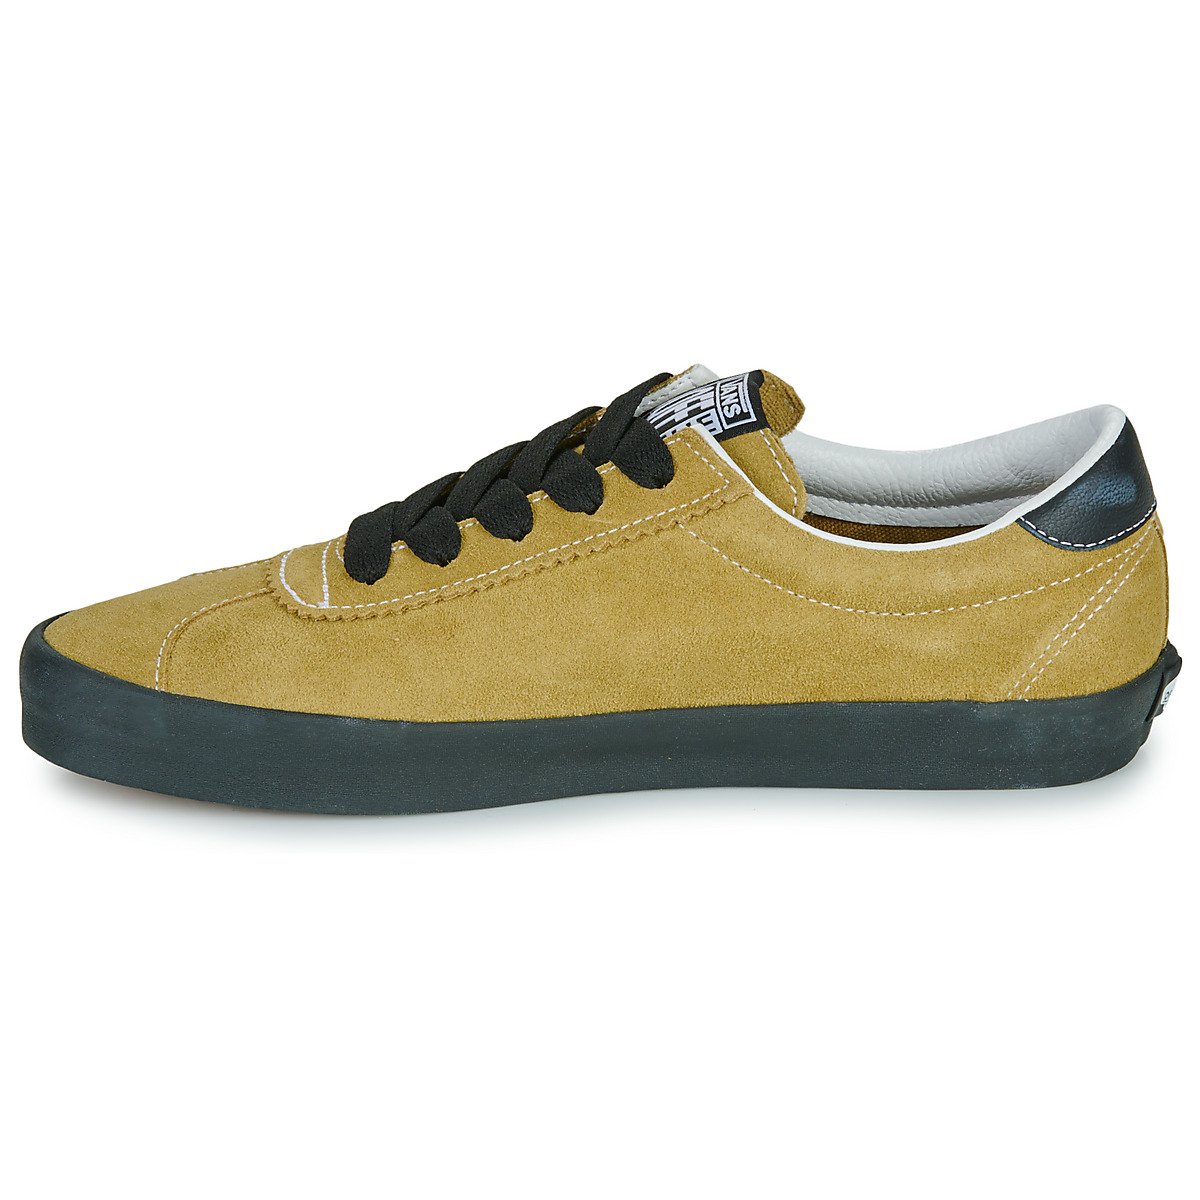 Shoes (Trainers) Sport Low